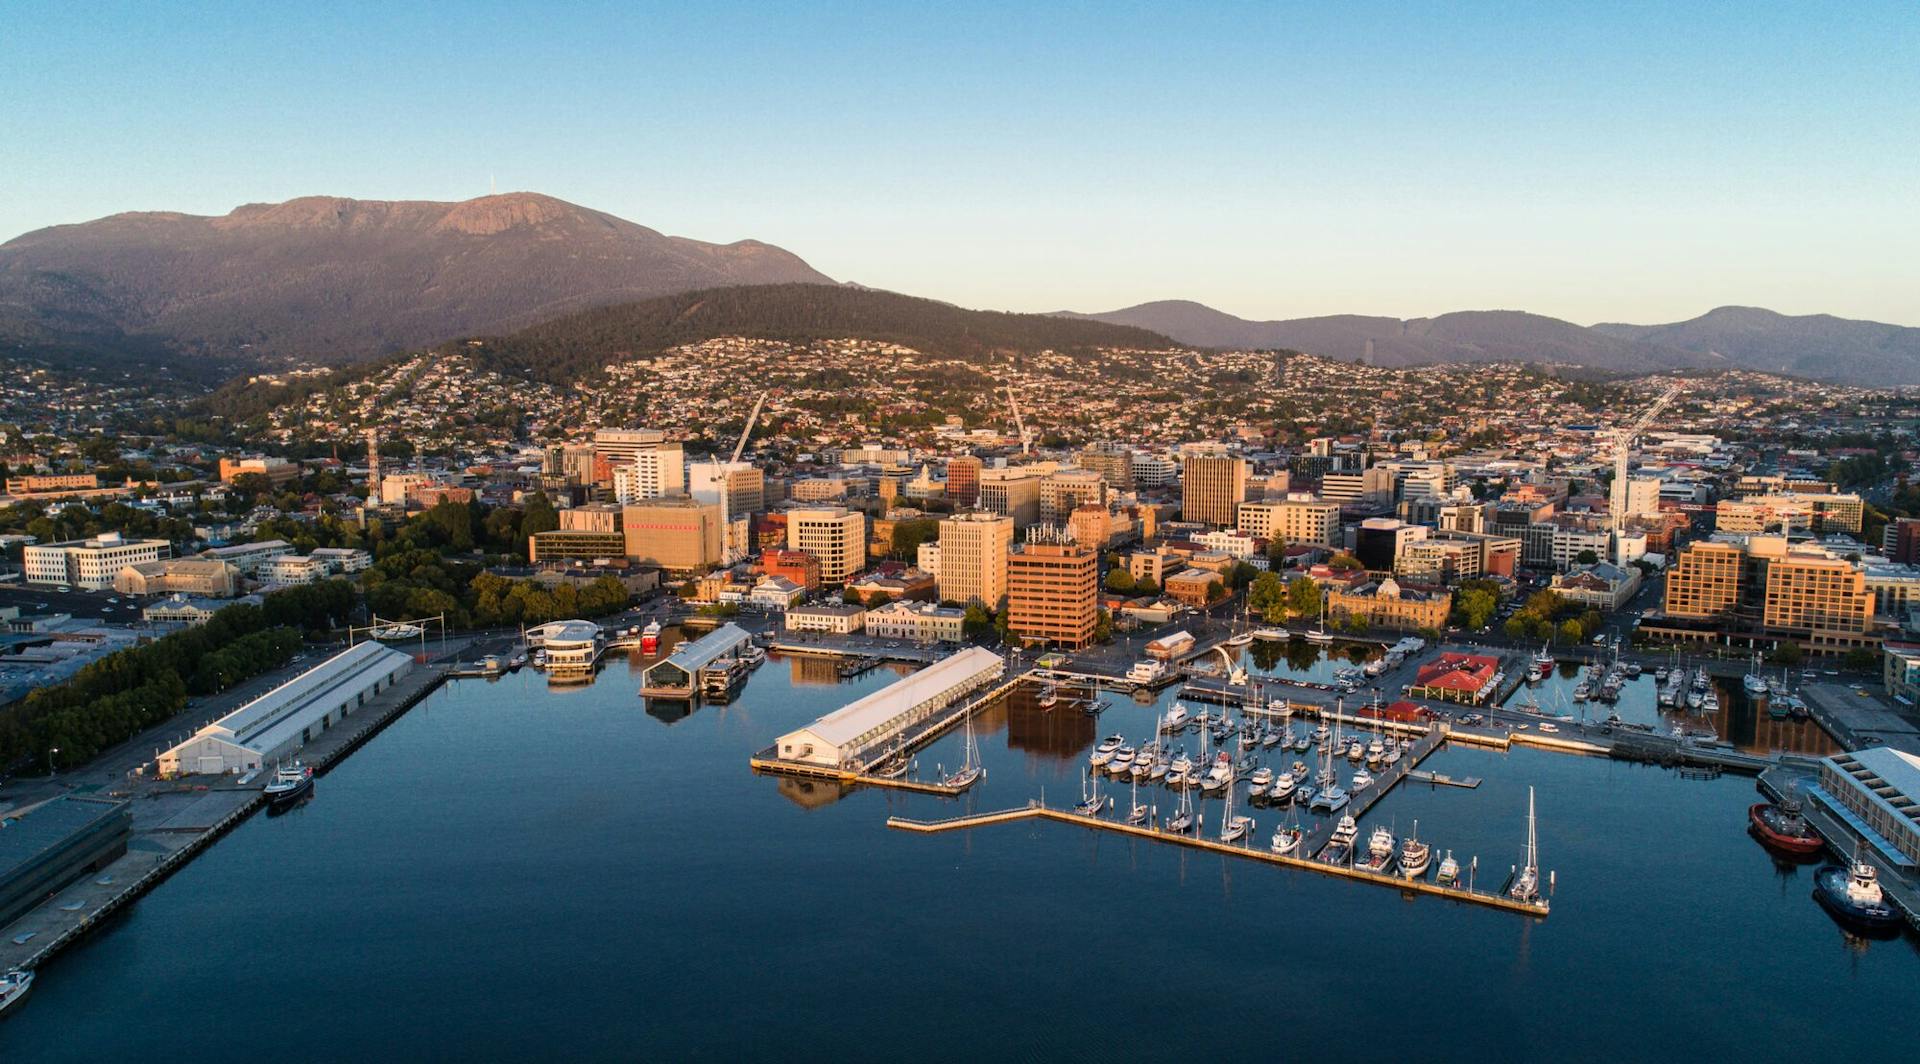 Hobart’s First Rooftop Restaurant, AURA, Selects SevenRooms to Power its Guest Experience